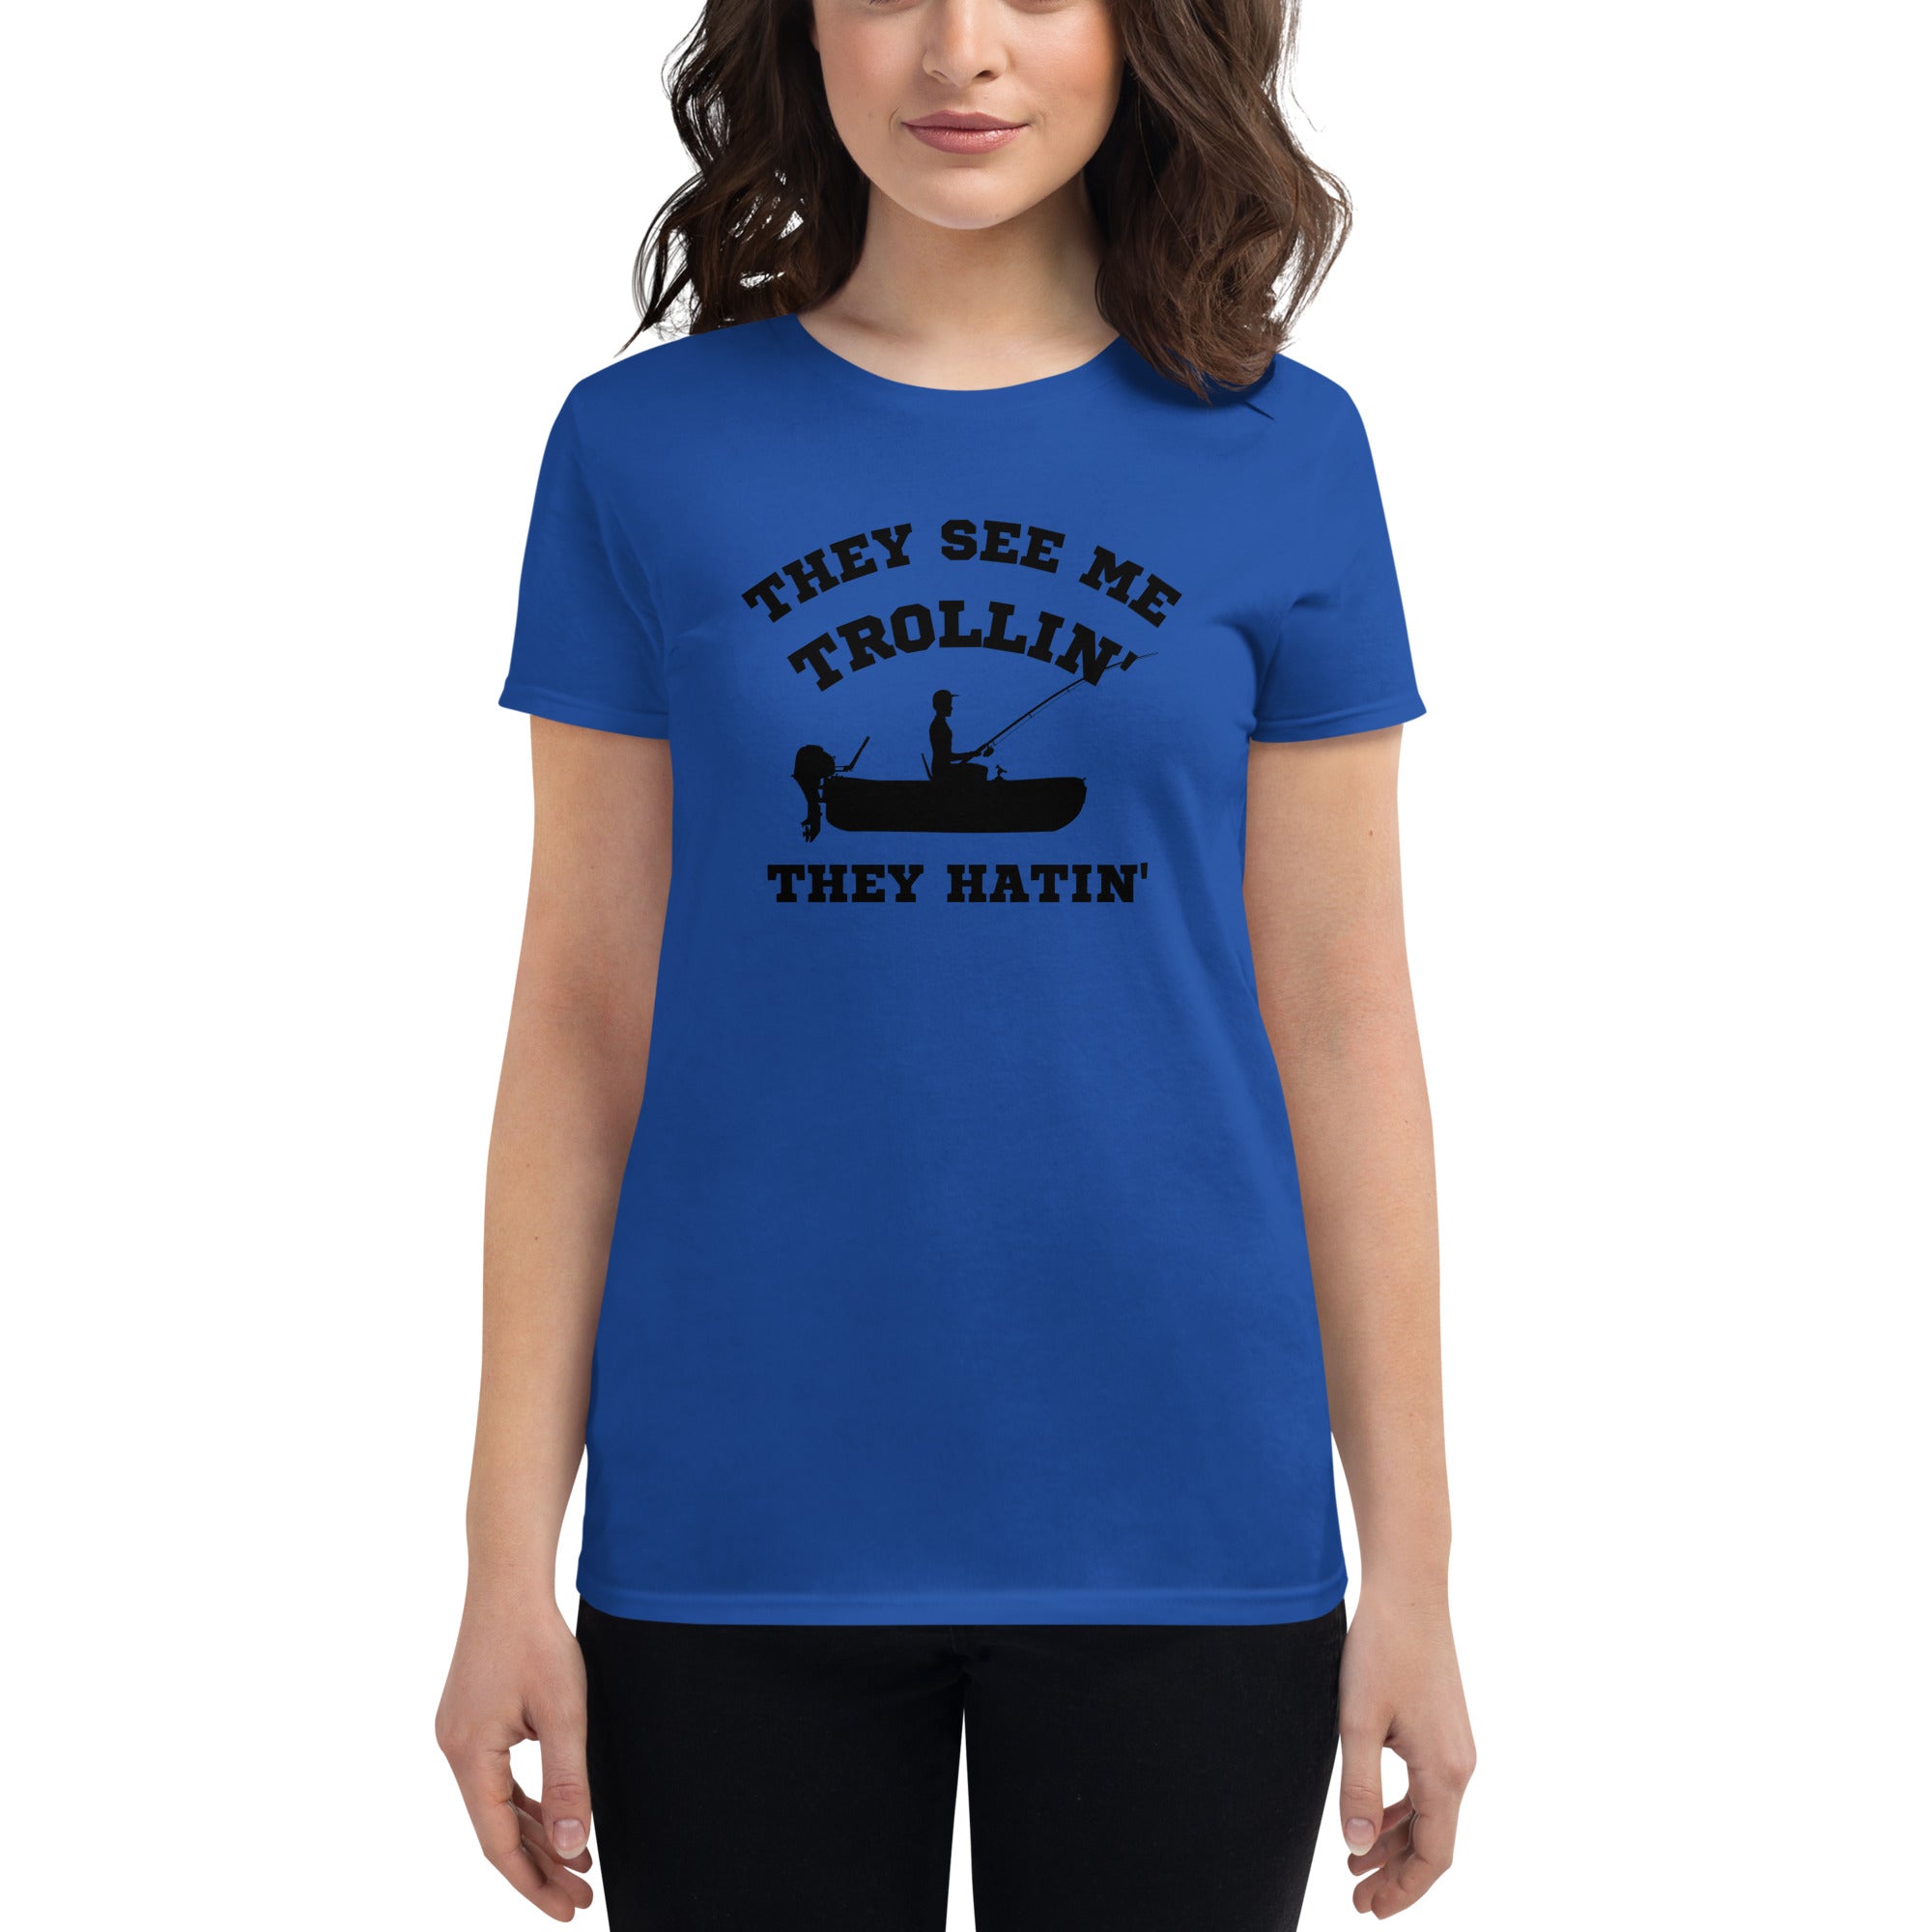 They See Me Trollin' Women's Fitted T-Shirt